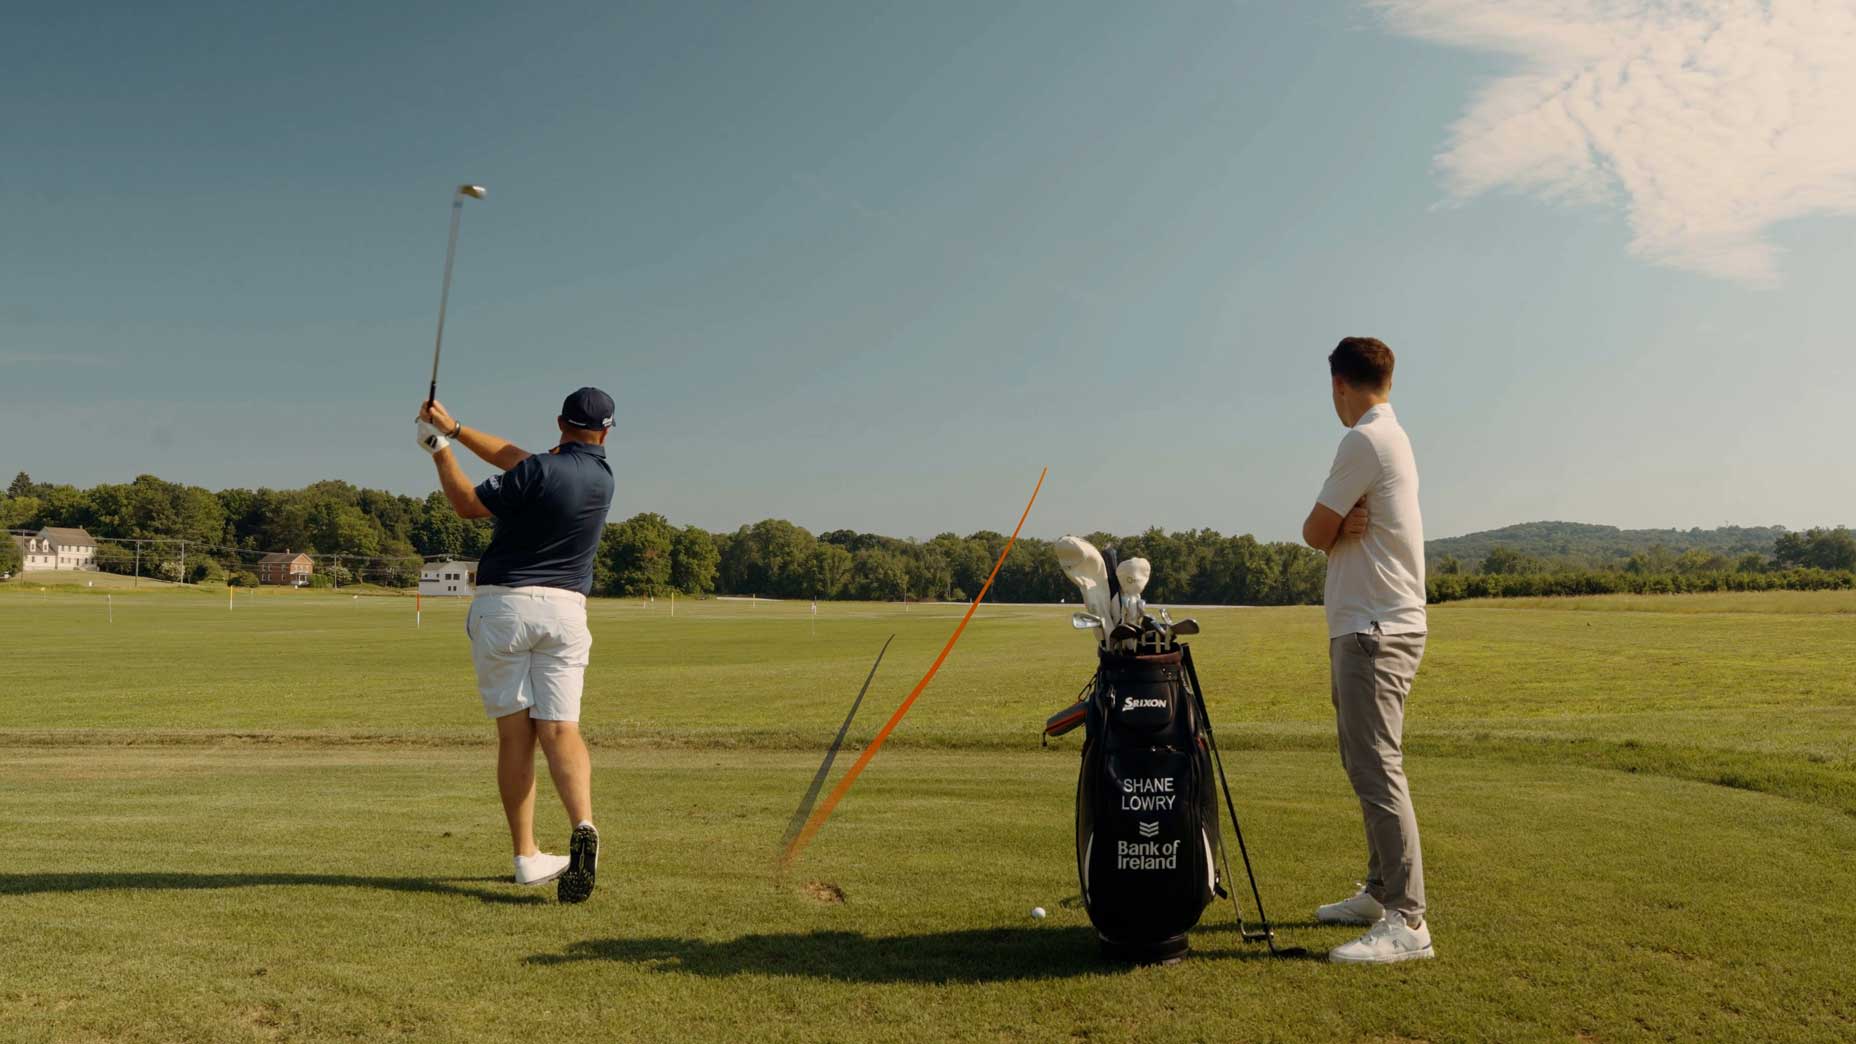 10 secrets Shane Lowry taught me in an hour on the driving range